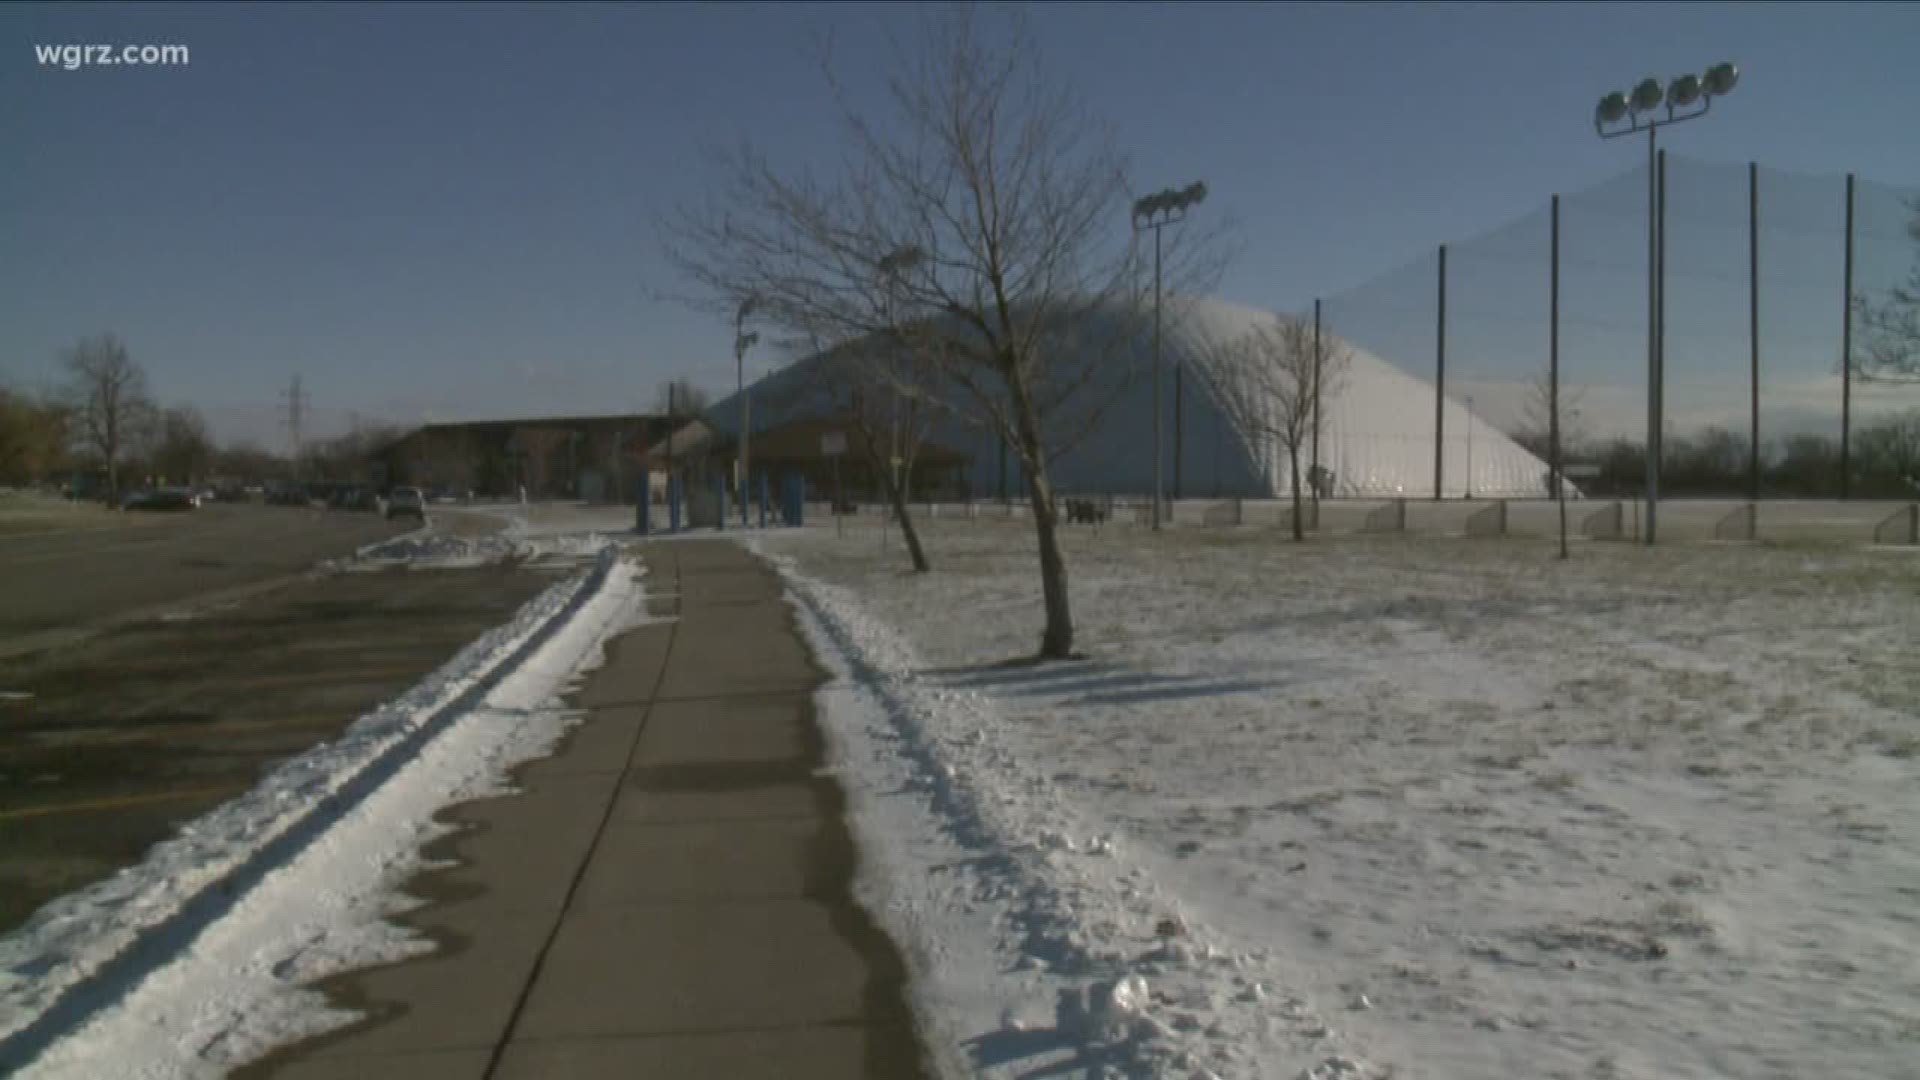 New Roof For Golf Dome In Town Of Tonawanda